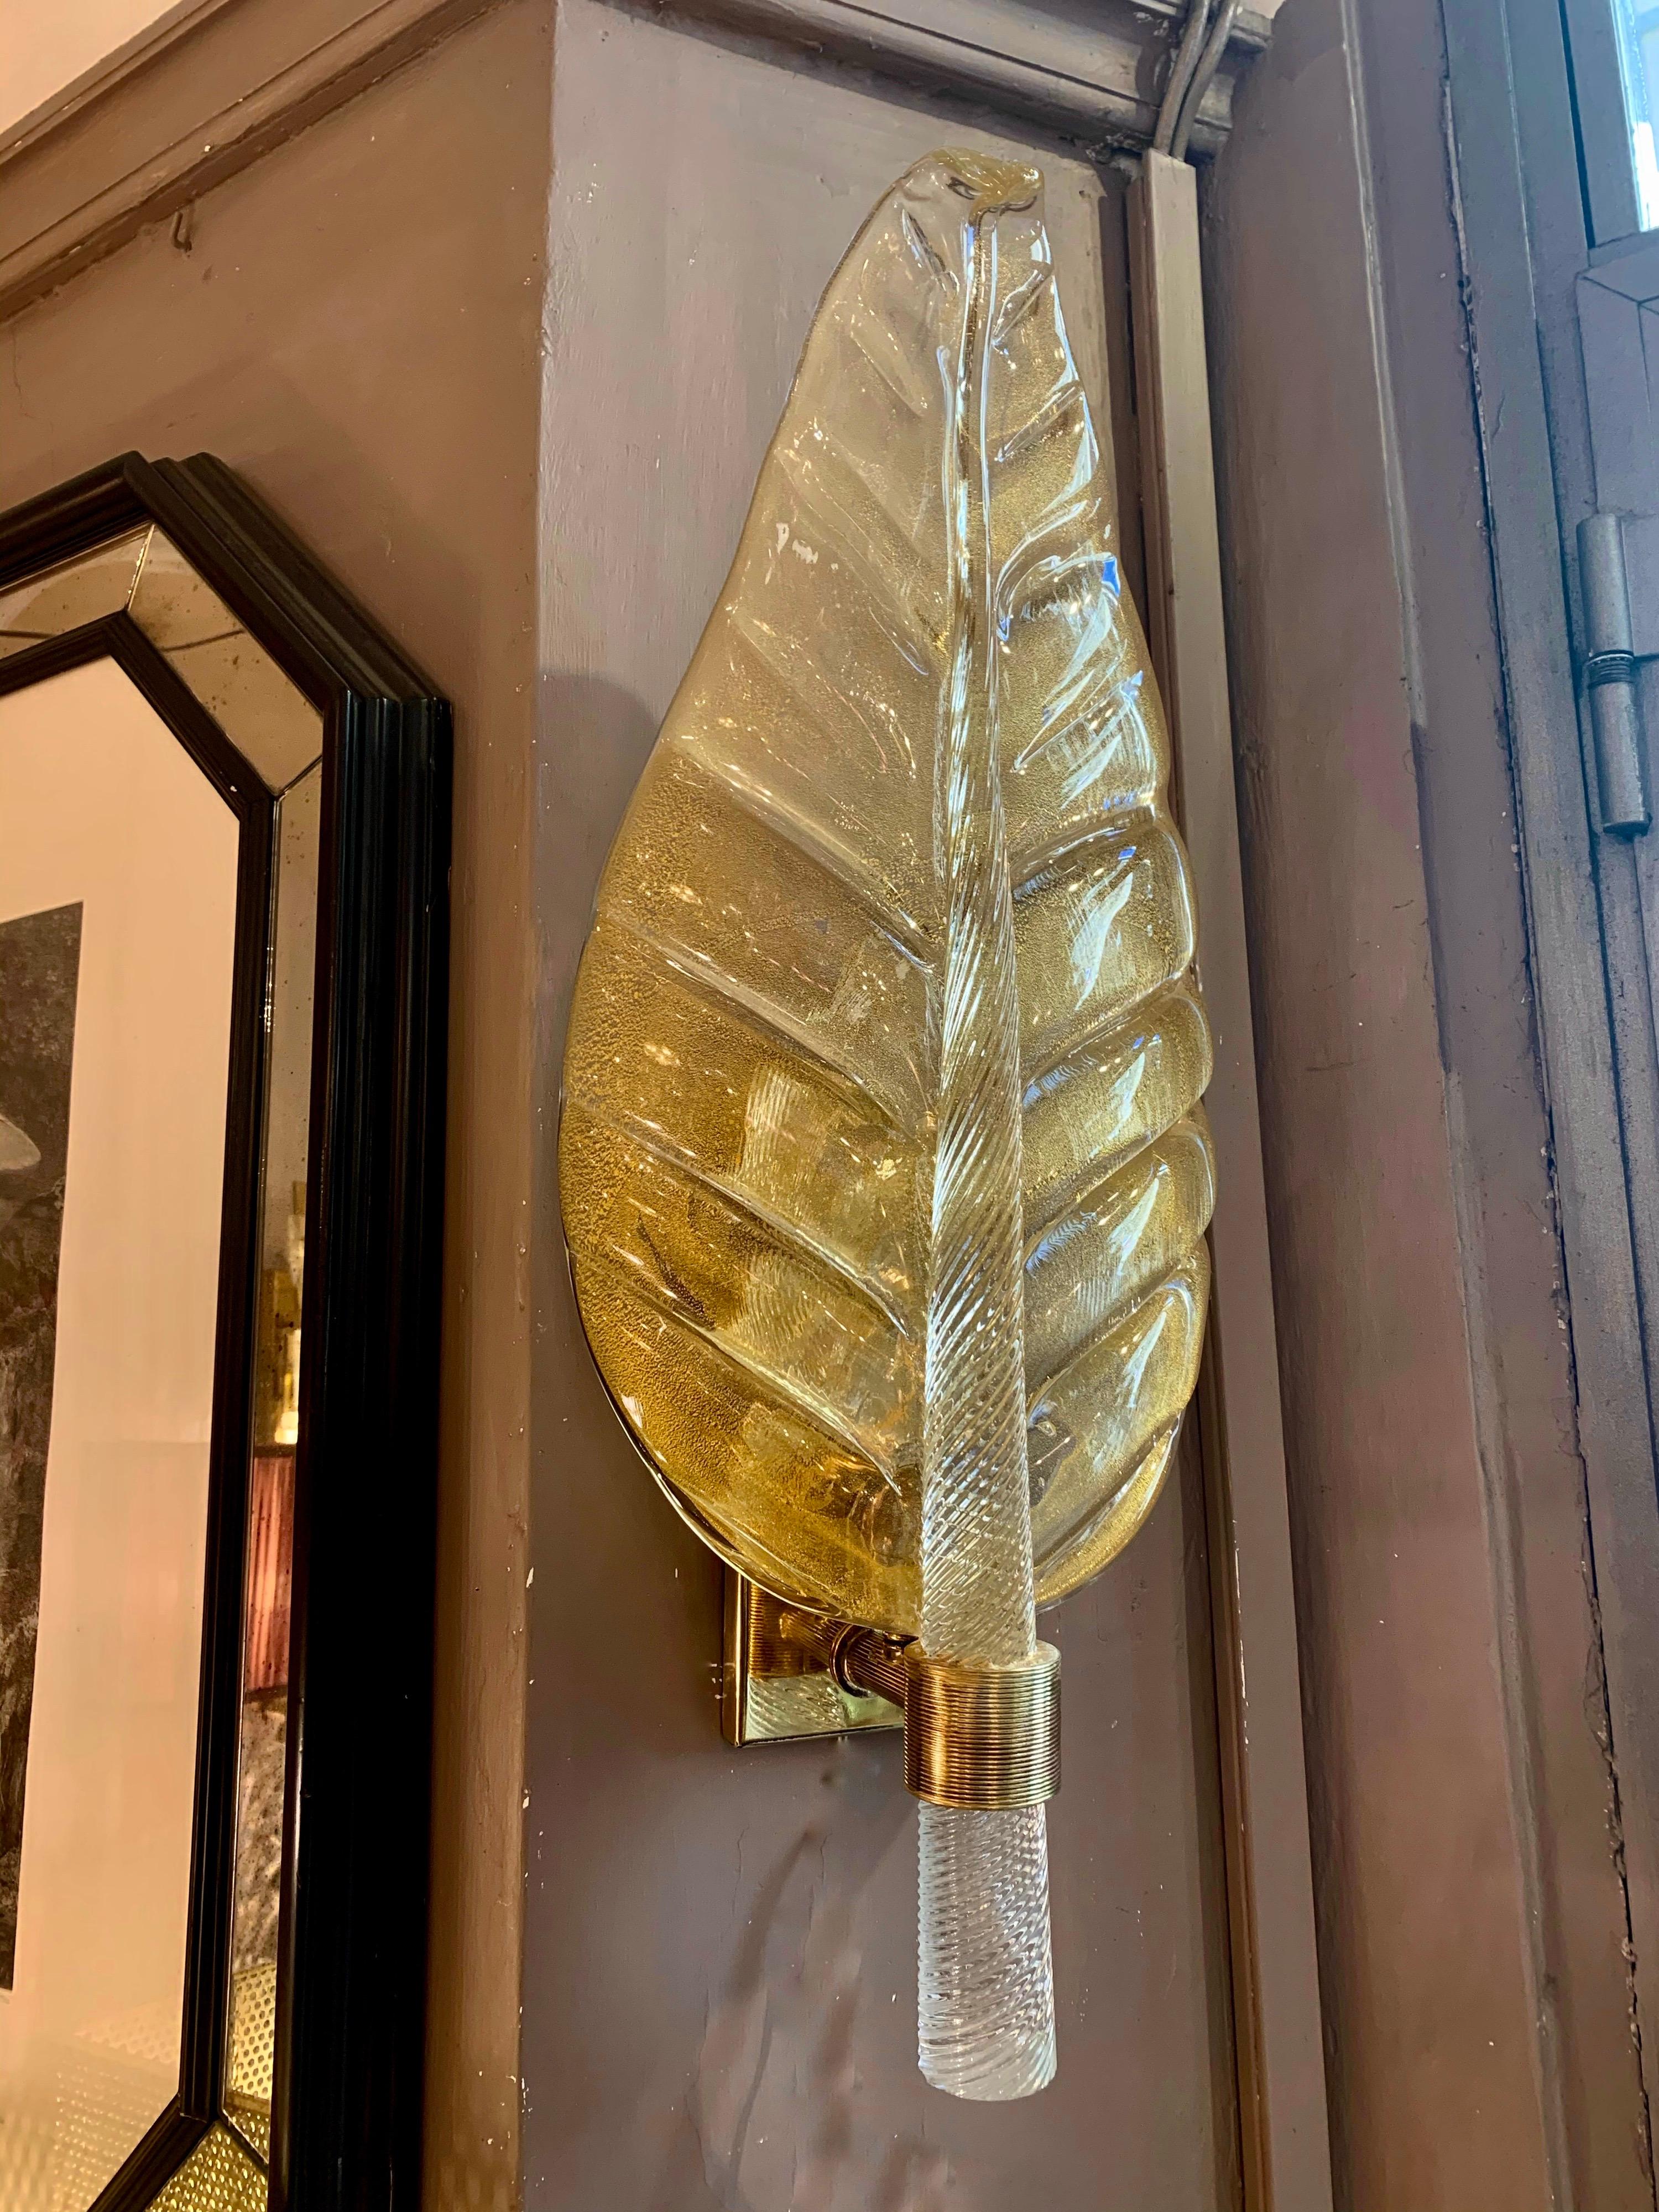 Pair of Murano glass gold leaf sconces, brass structure, one bulb each lamp. These sconces are in Murano hand blown thick glass with gold flecks, the stem of the leaf is in full transparent torchon glass.